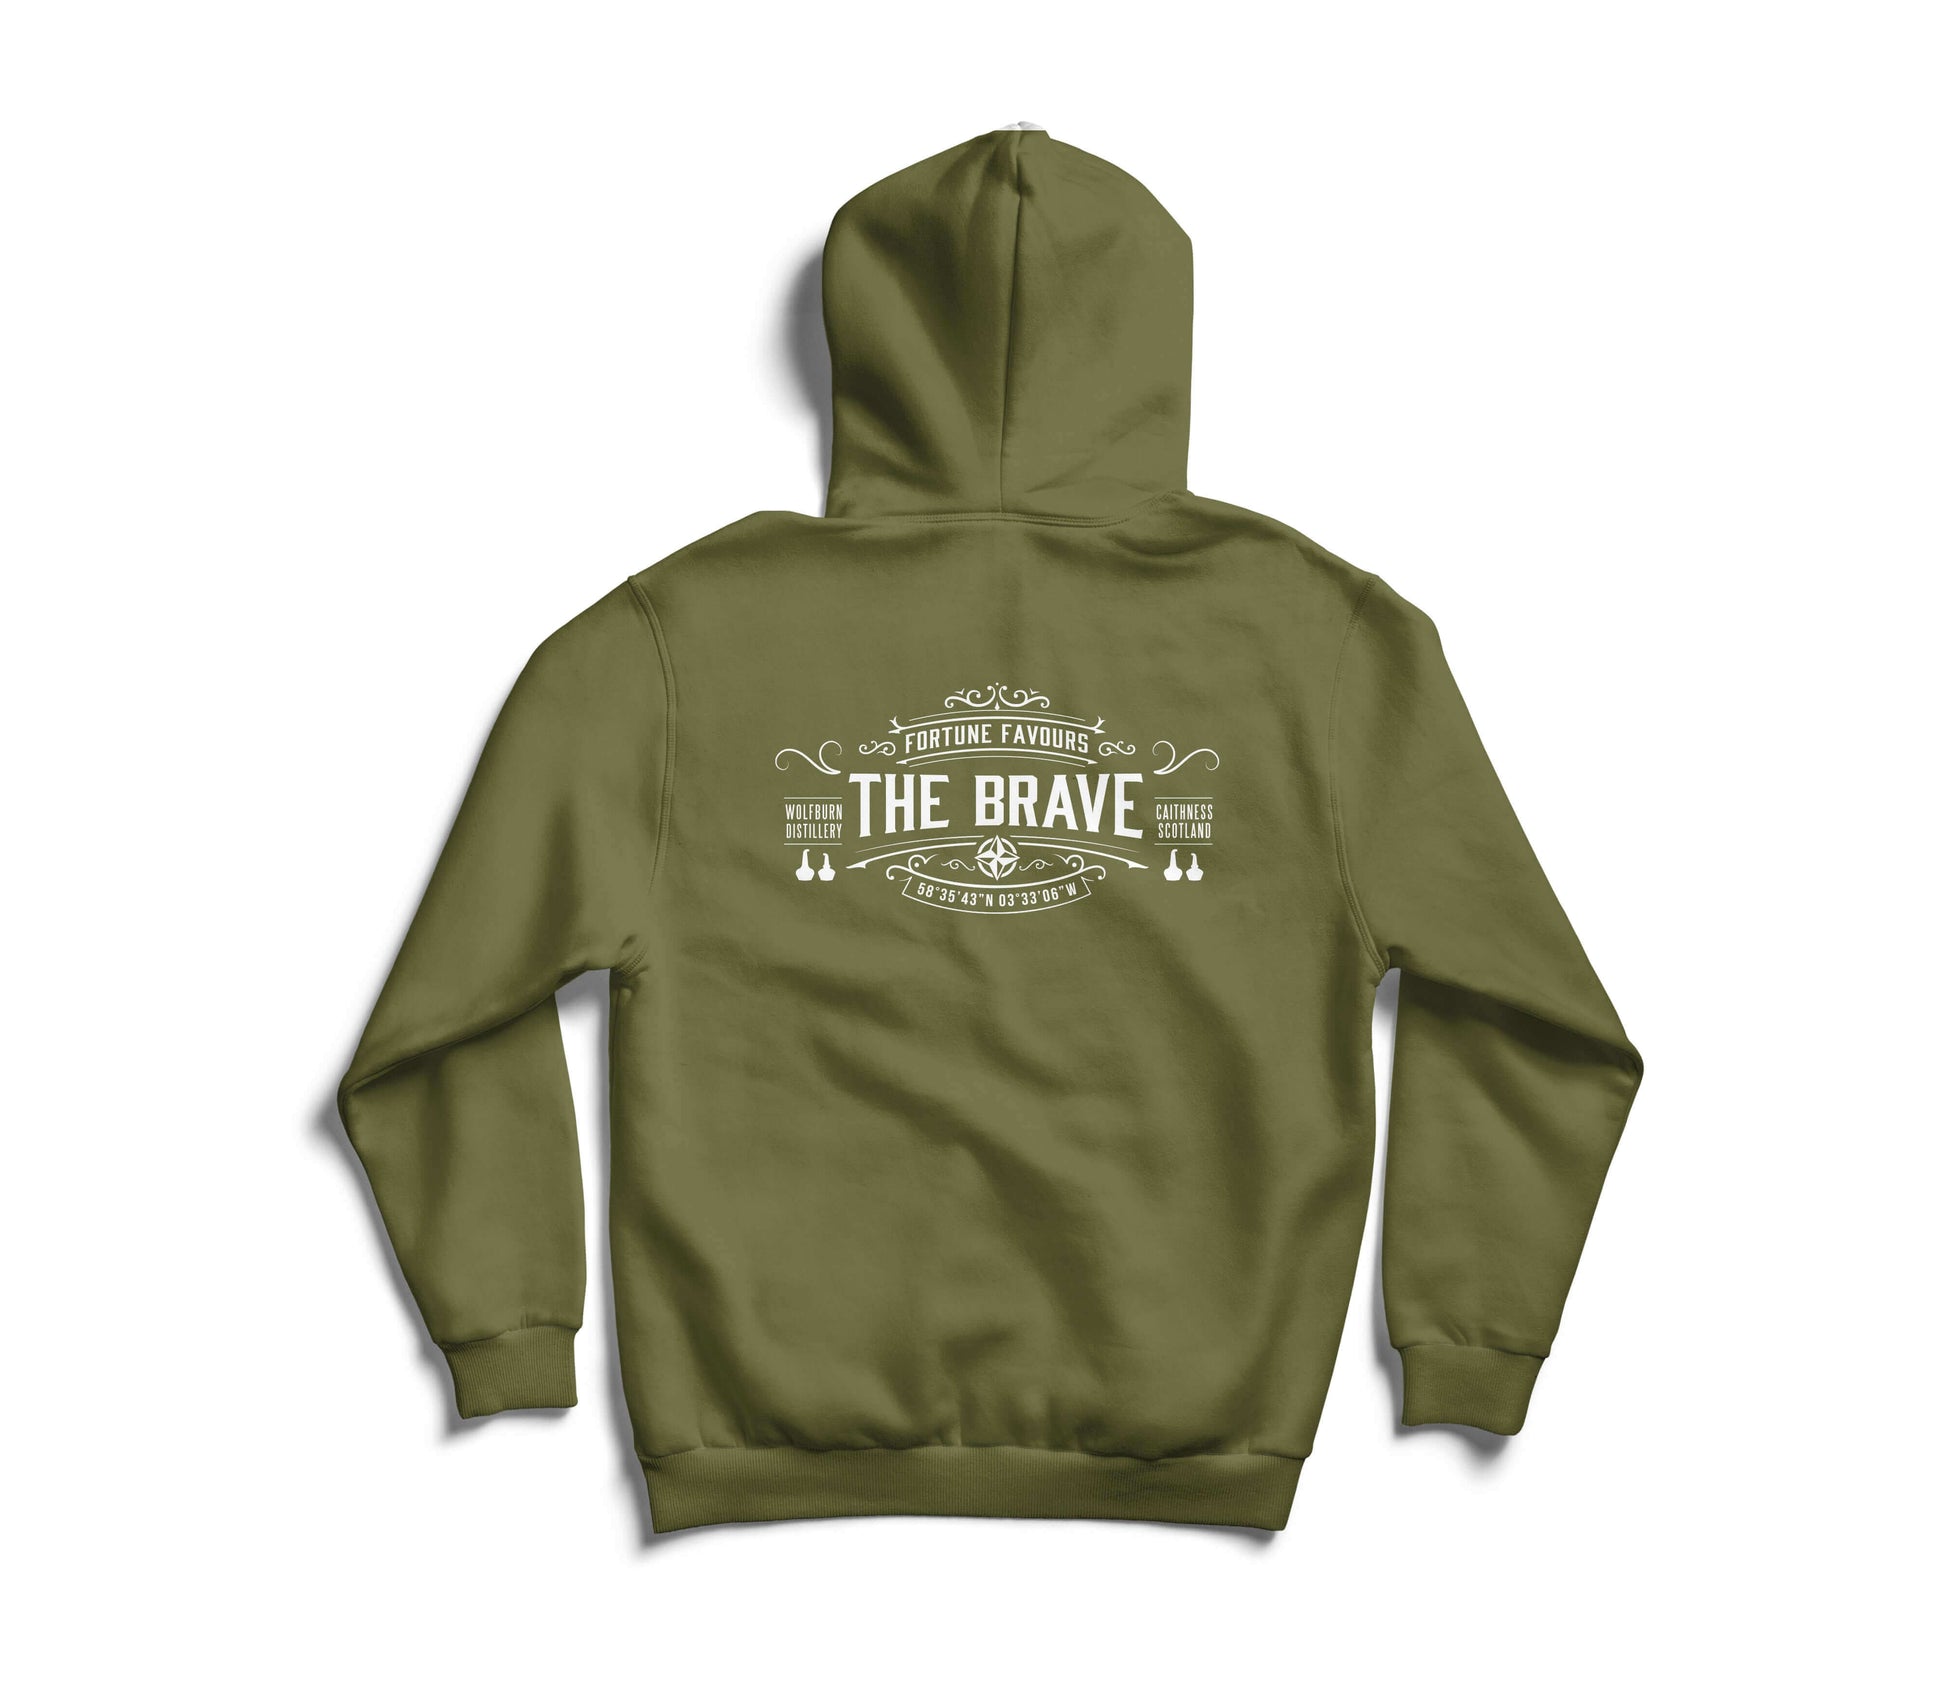 Wolfburn Hoodie ‘The Brave’ Army Green Hooded top. Screen printed 'Wolfburn' logo on the chest and large 'The Brave' on the back.